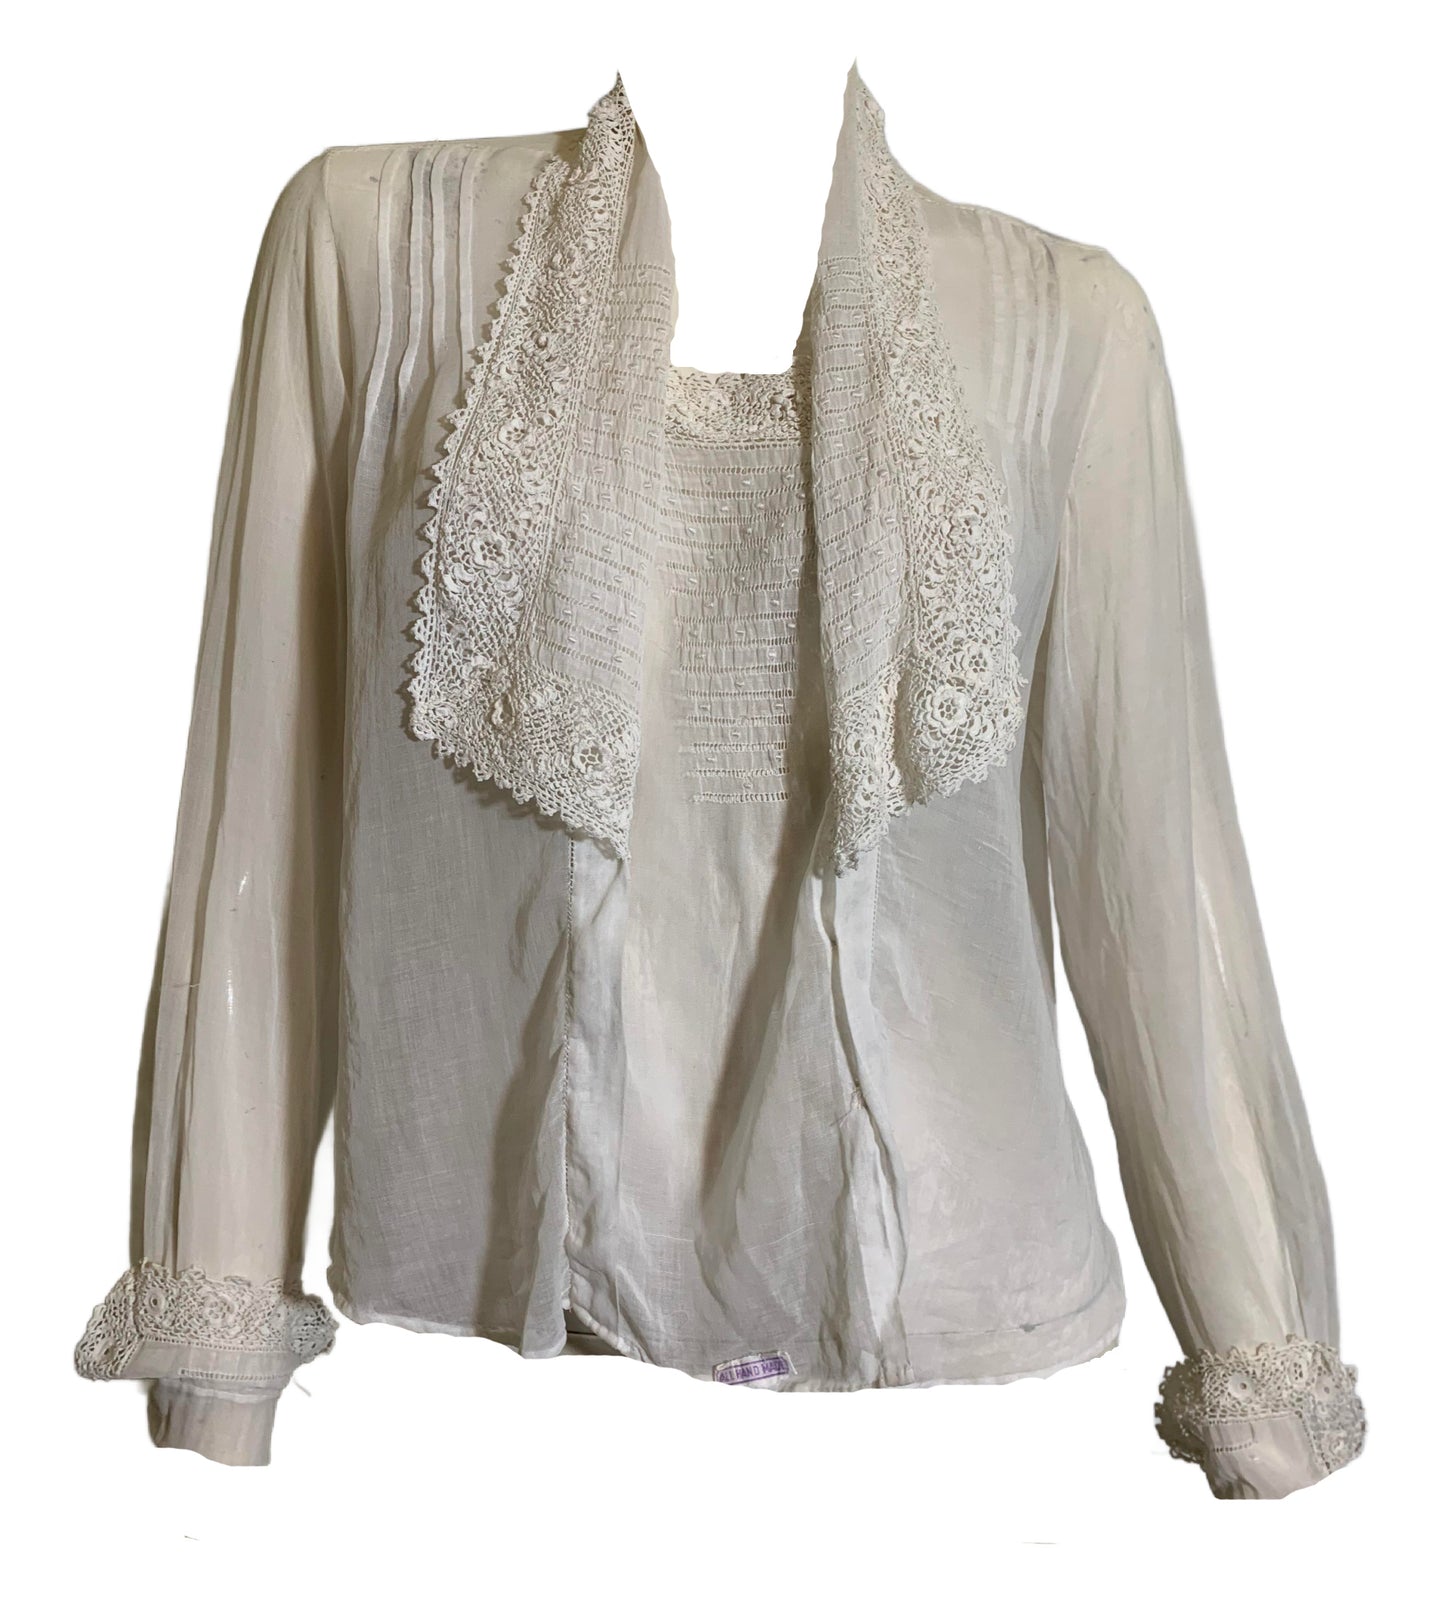 Long Sleeved White Lawn Cotton Blouse with Lace Collar and Embroidery circa 1910s